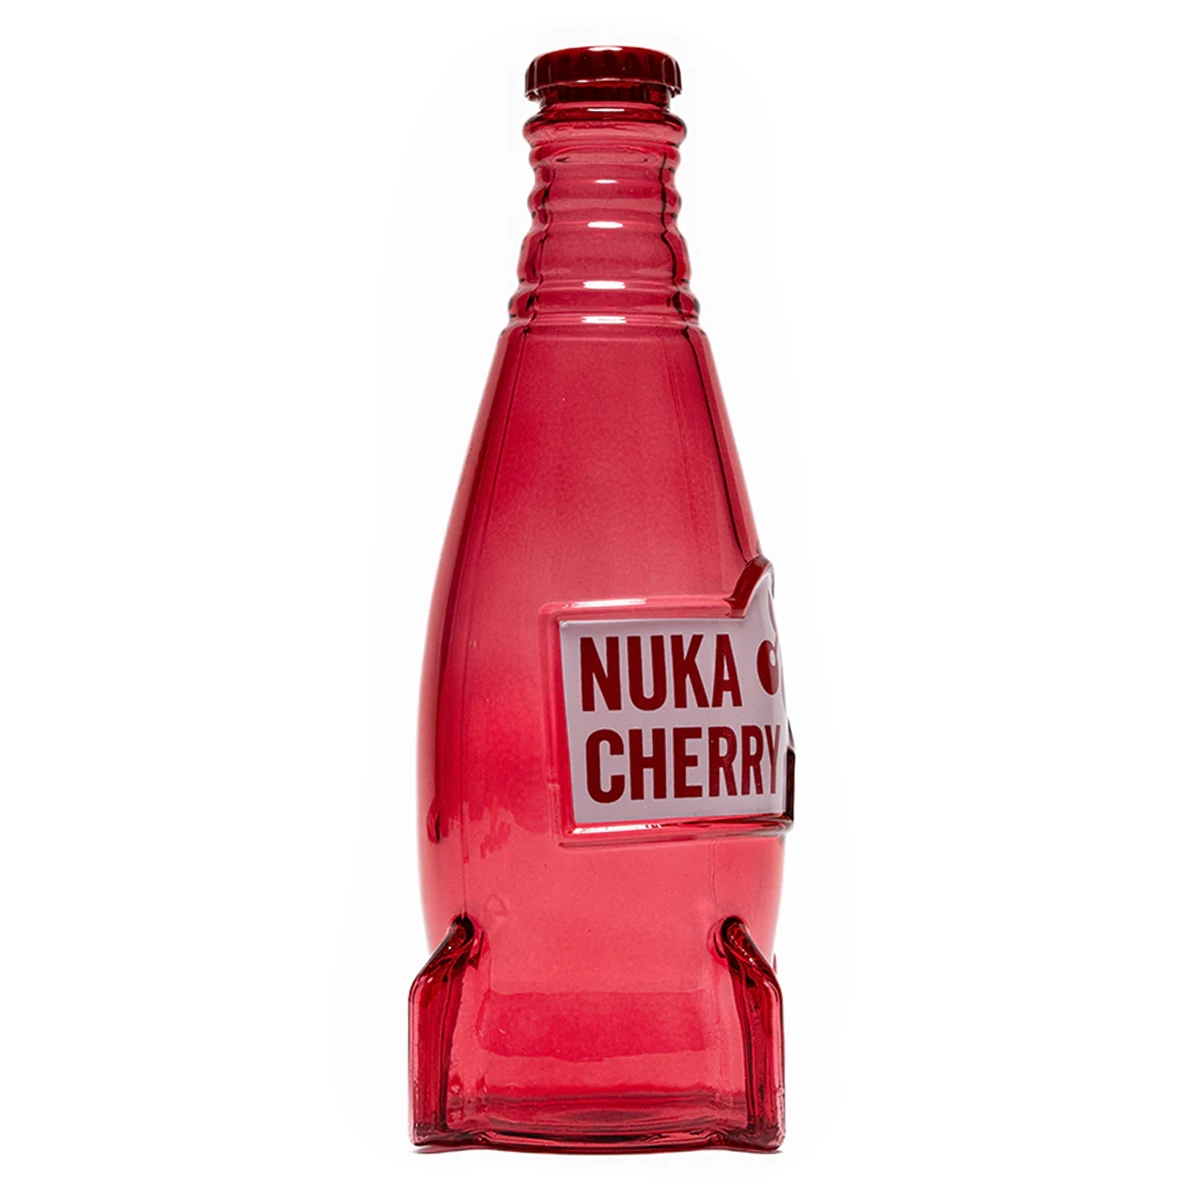 Fallout "Nuka Cola Cherry" Glass Bottle and Caps Image 4